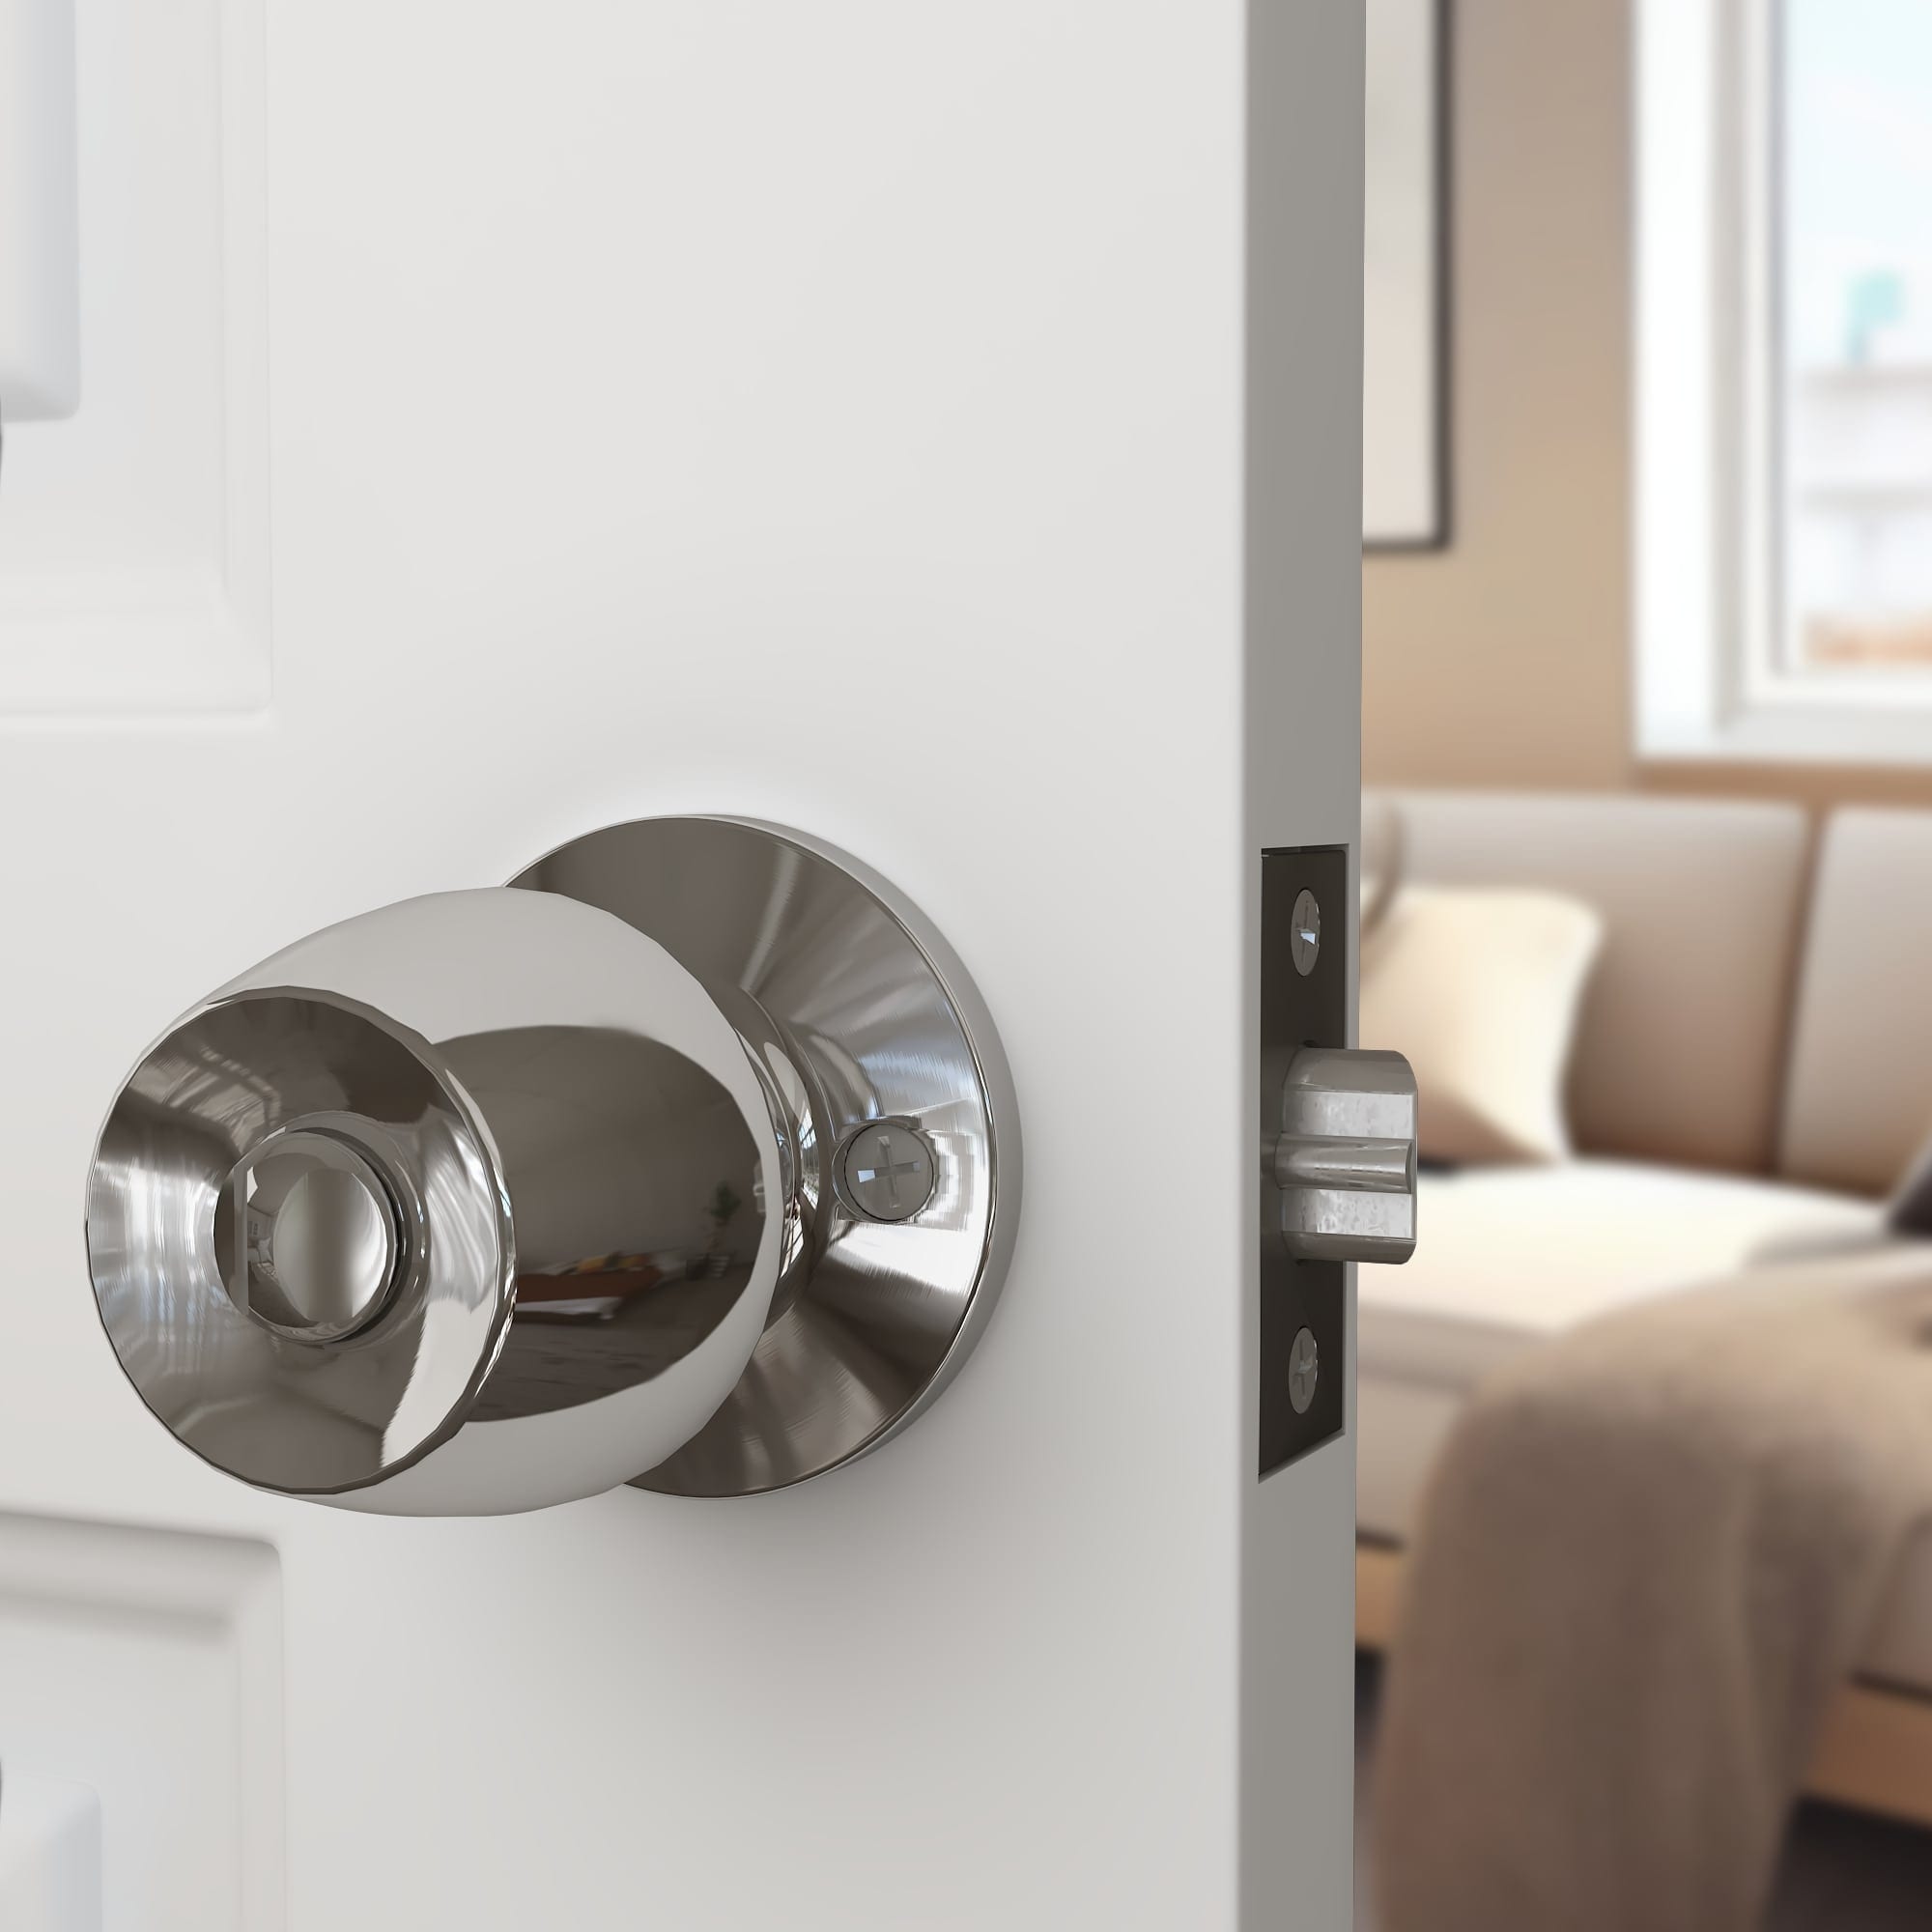 https://ak1.ostkcdn.com/images/products/is/images/direct/accf81d1c3aea69f38513e9d18b028623415ab63/2-Pack-Door-Knob-and-Lock-Set-Versa-Keyed-by-Villar-Home-Designs.jpg